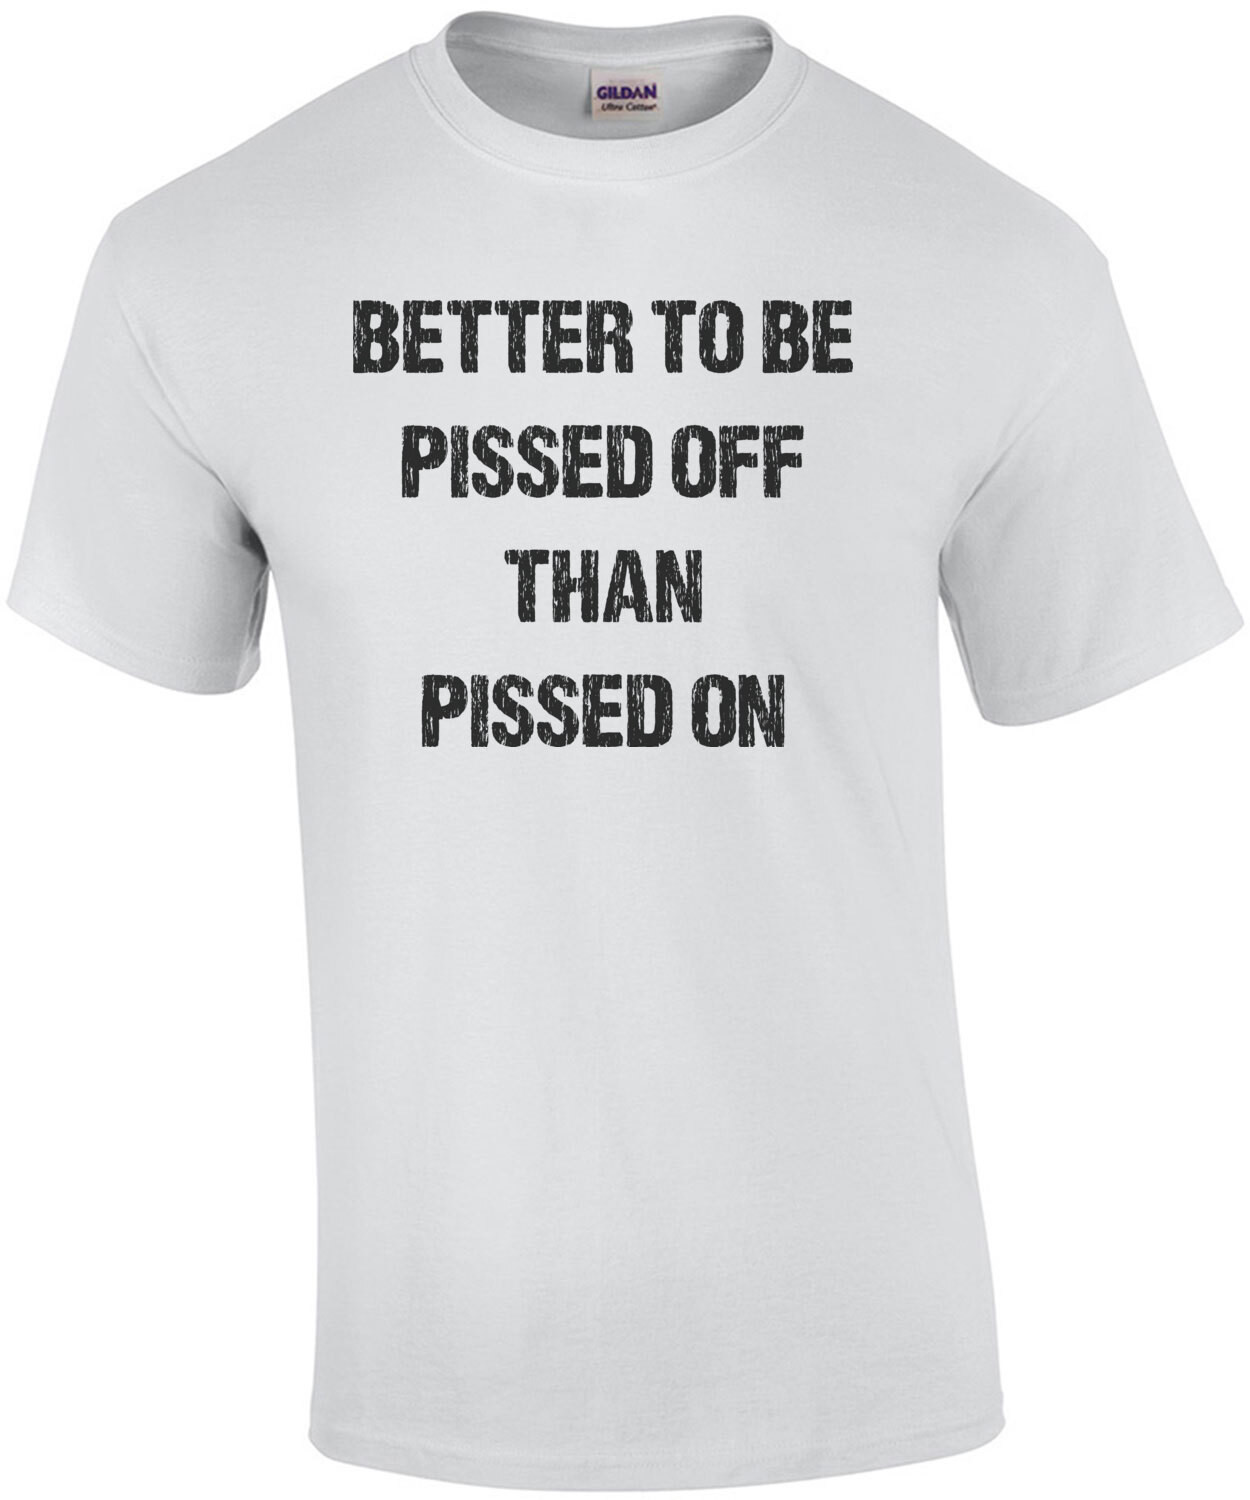 Better to be pissed off than pissed on! Funny graphic tee